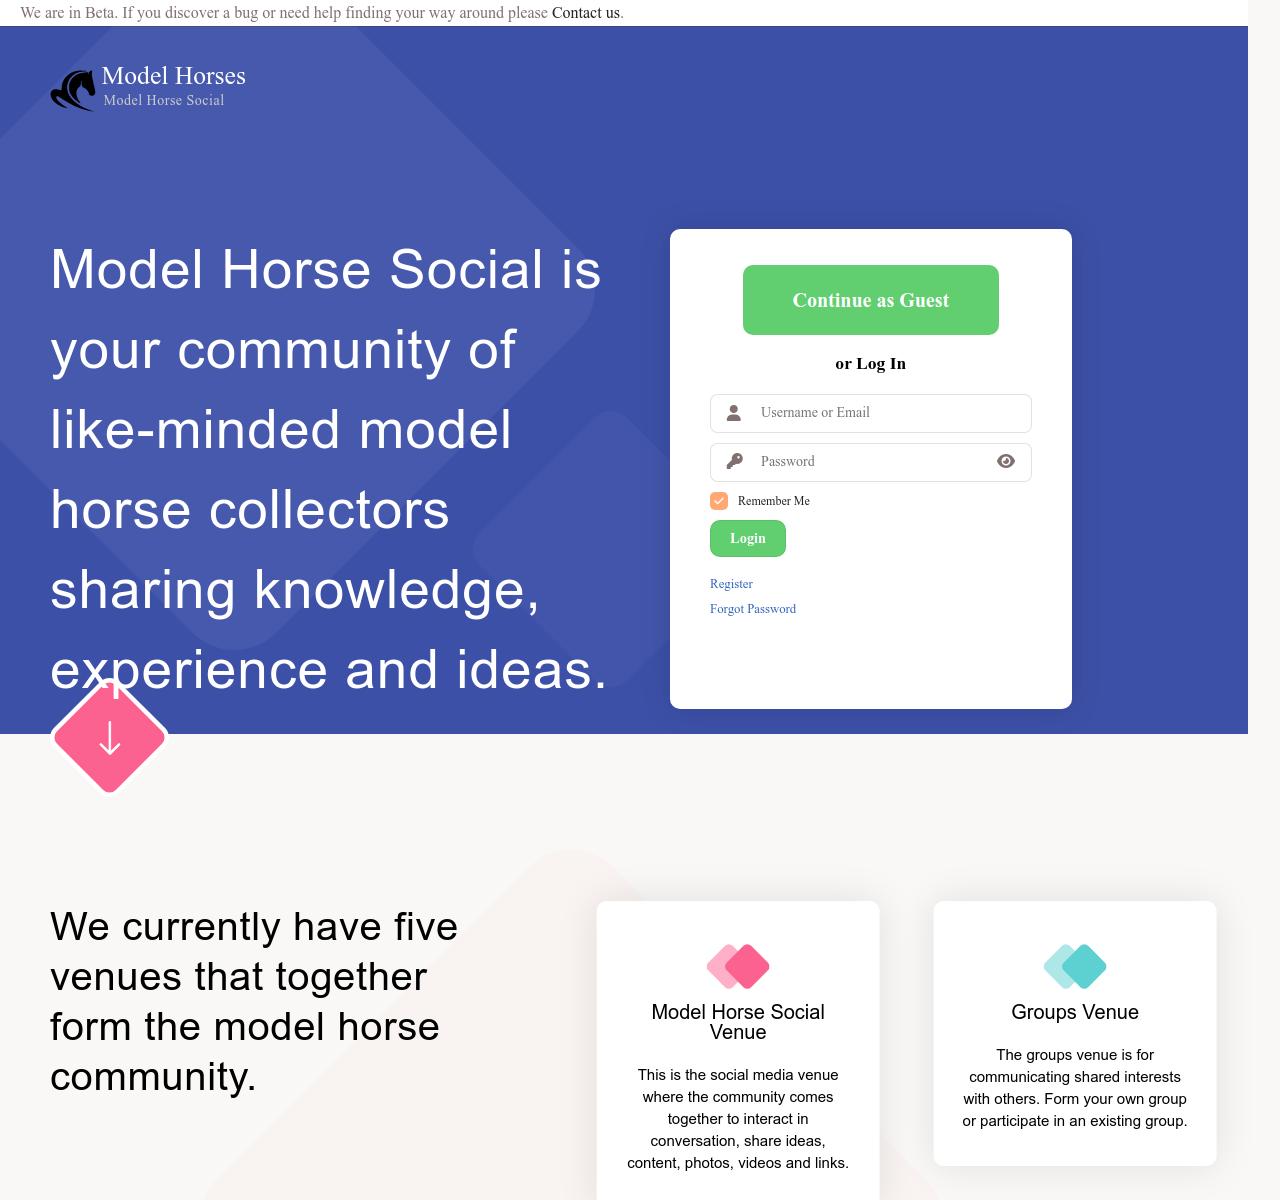 Modle Horse Social - Portal to the the model horse hobby.